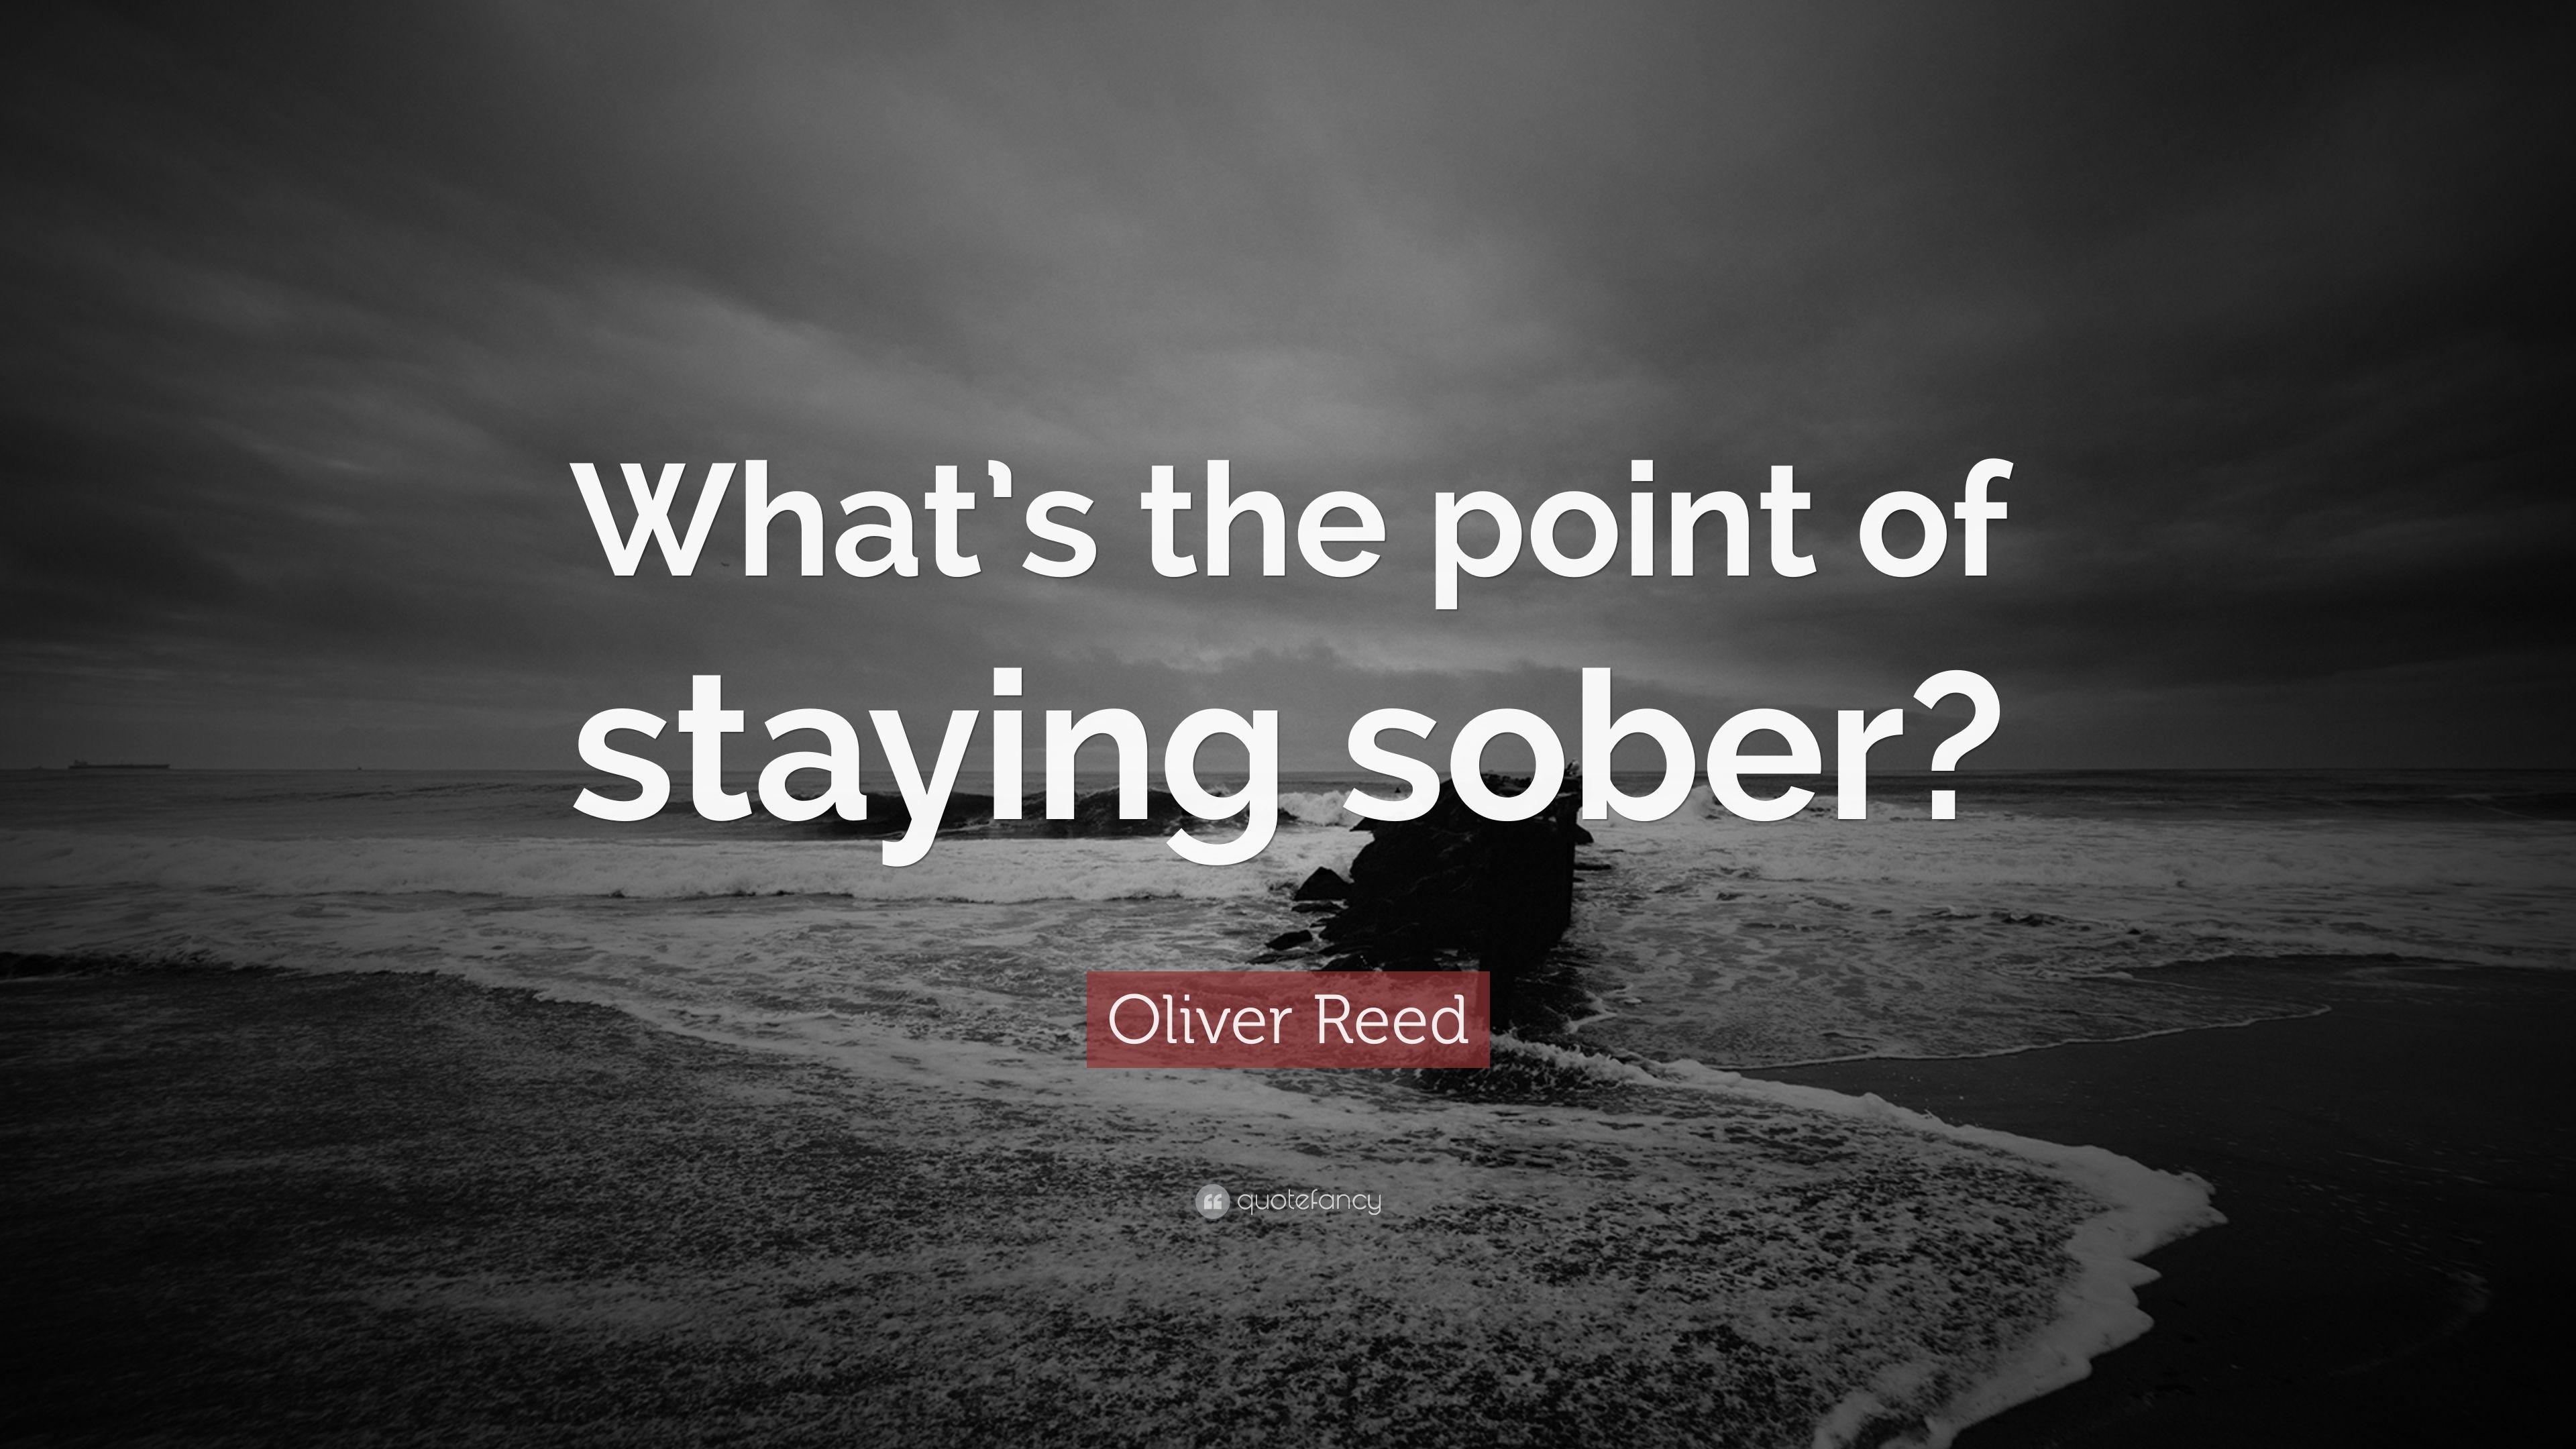 Oliver Reed Quote: “What's the point of staying sober?” (7 wallpaper)